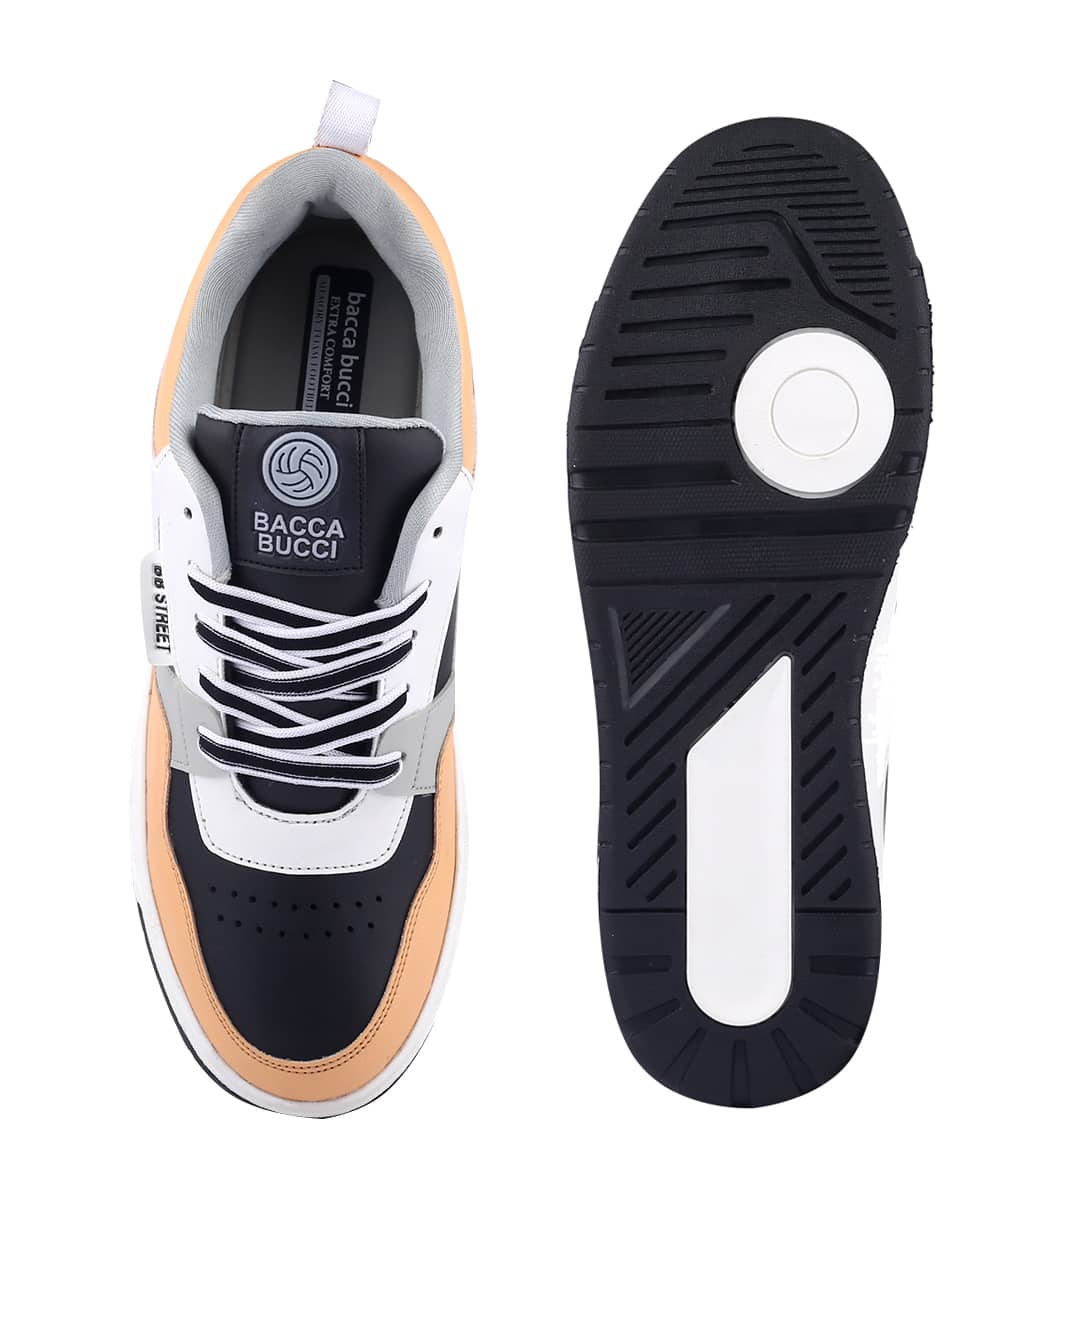 Bacca Bucci Urban Genesis 1.0 Sneakers: The Pinnacle of Street-Smart Elegance with Breathable Perforated Design and Robust Sole for the Modern Trailblazer